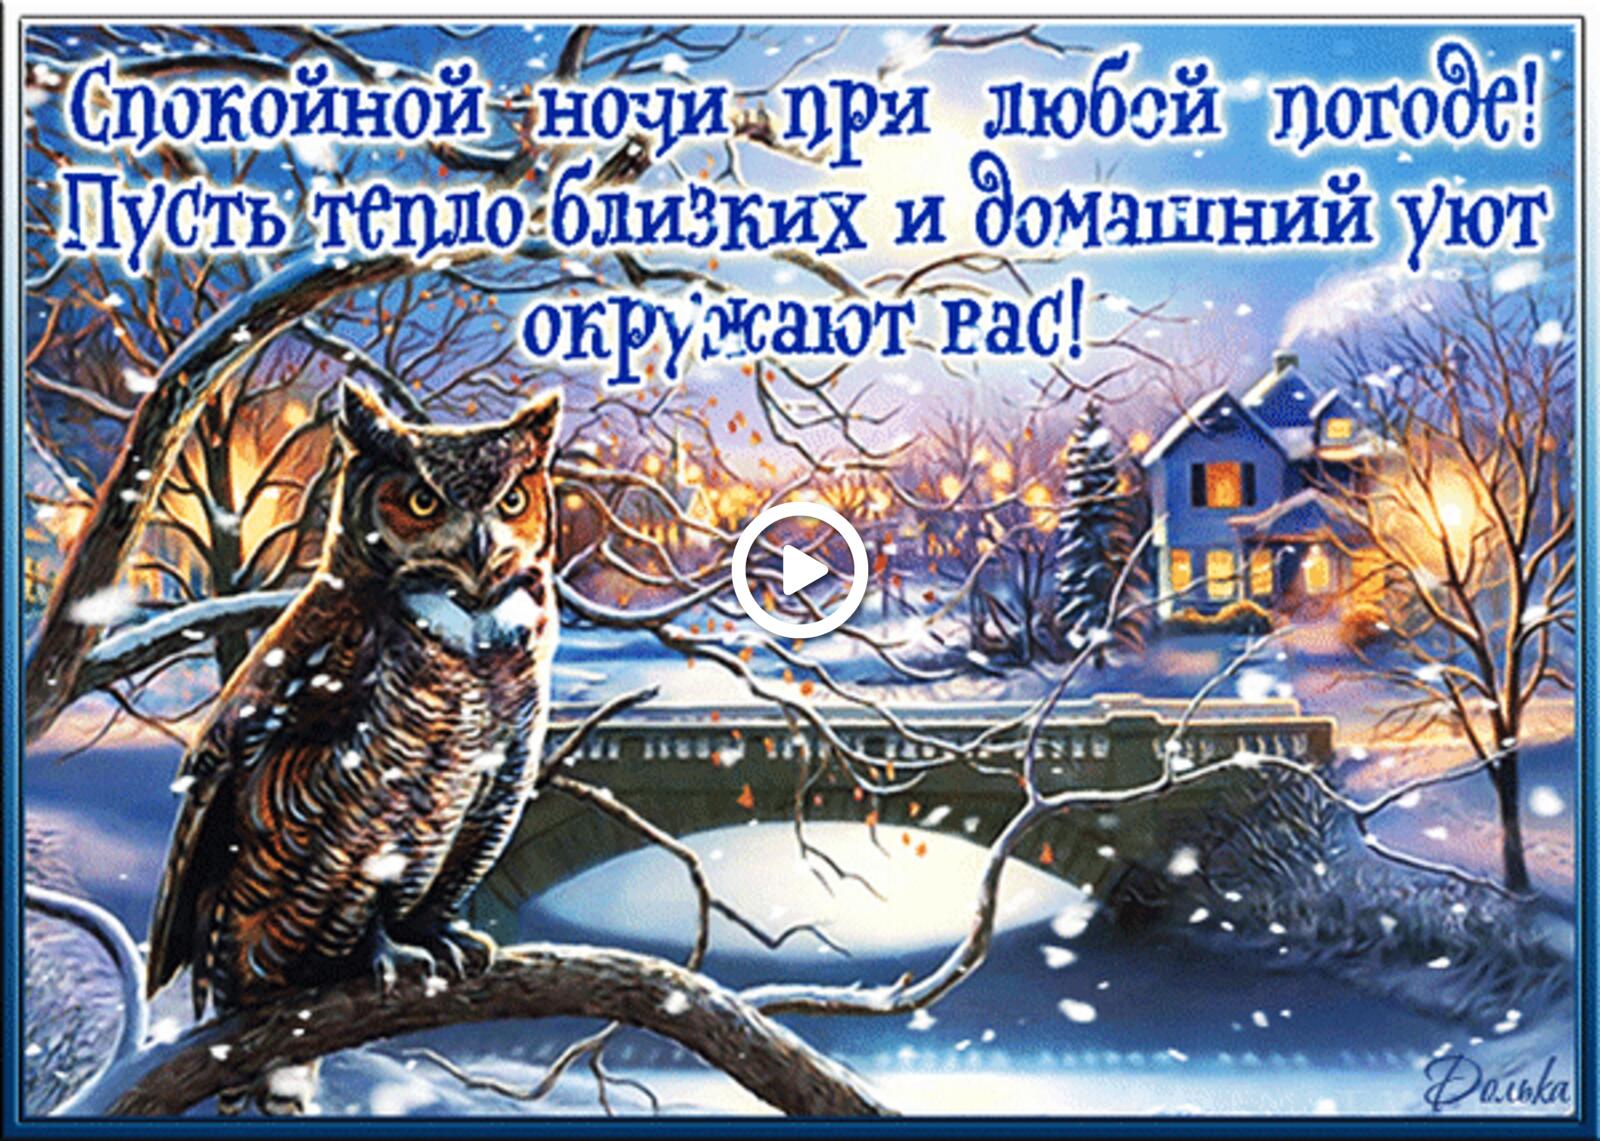 A postcard on the subject of good night snow winter for free